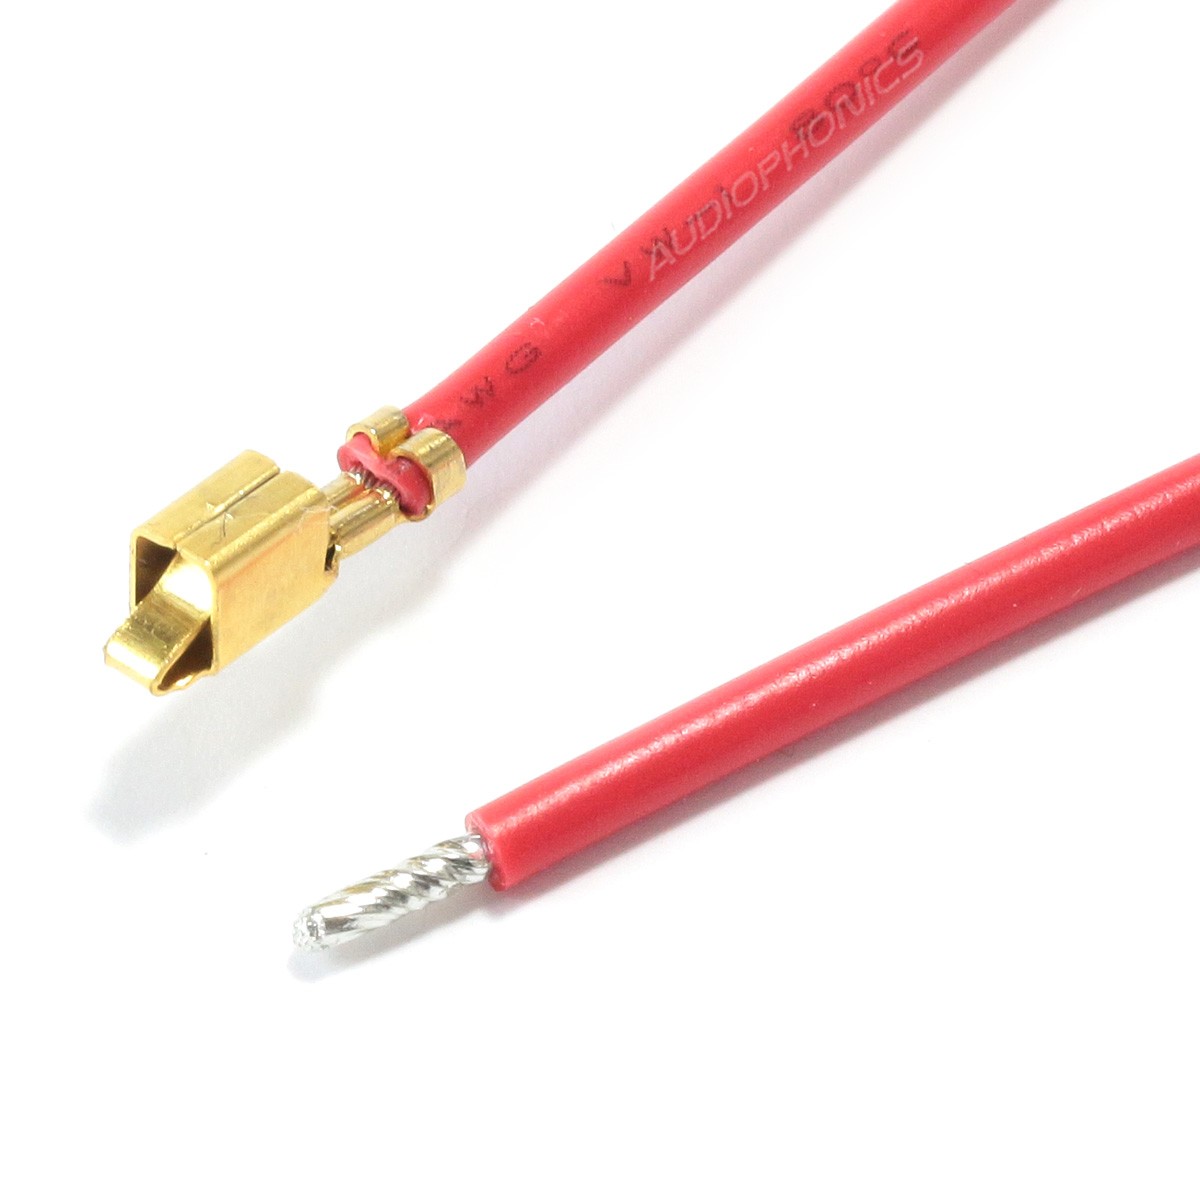 VH 3.96mm Cable Female to Bare Wire 1 Pole No Casing Gold Plated 20cm Red (x10)